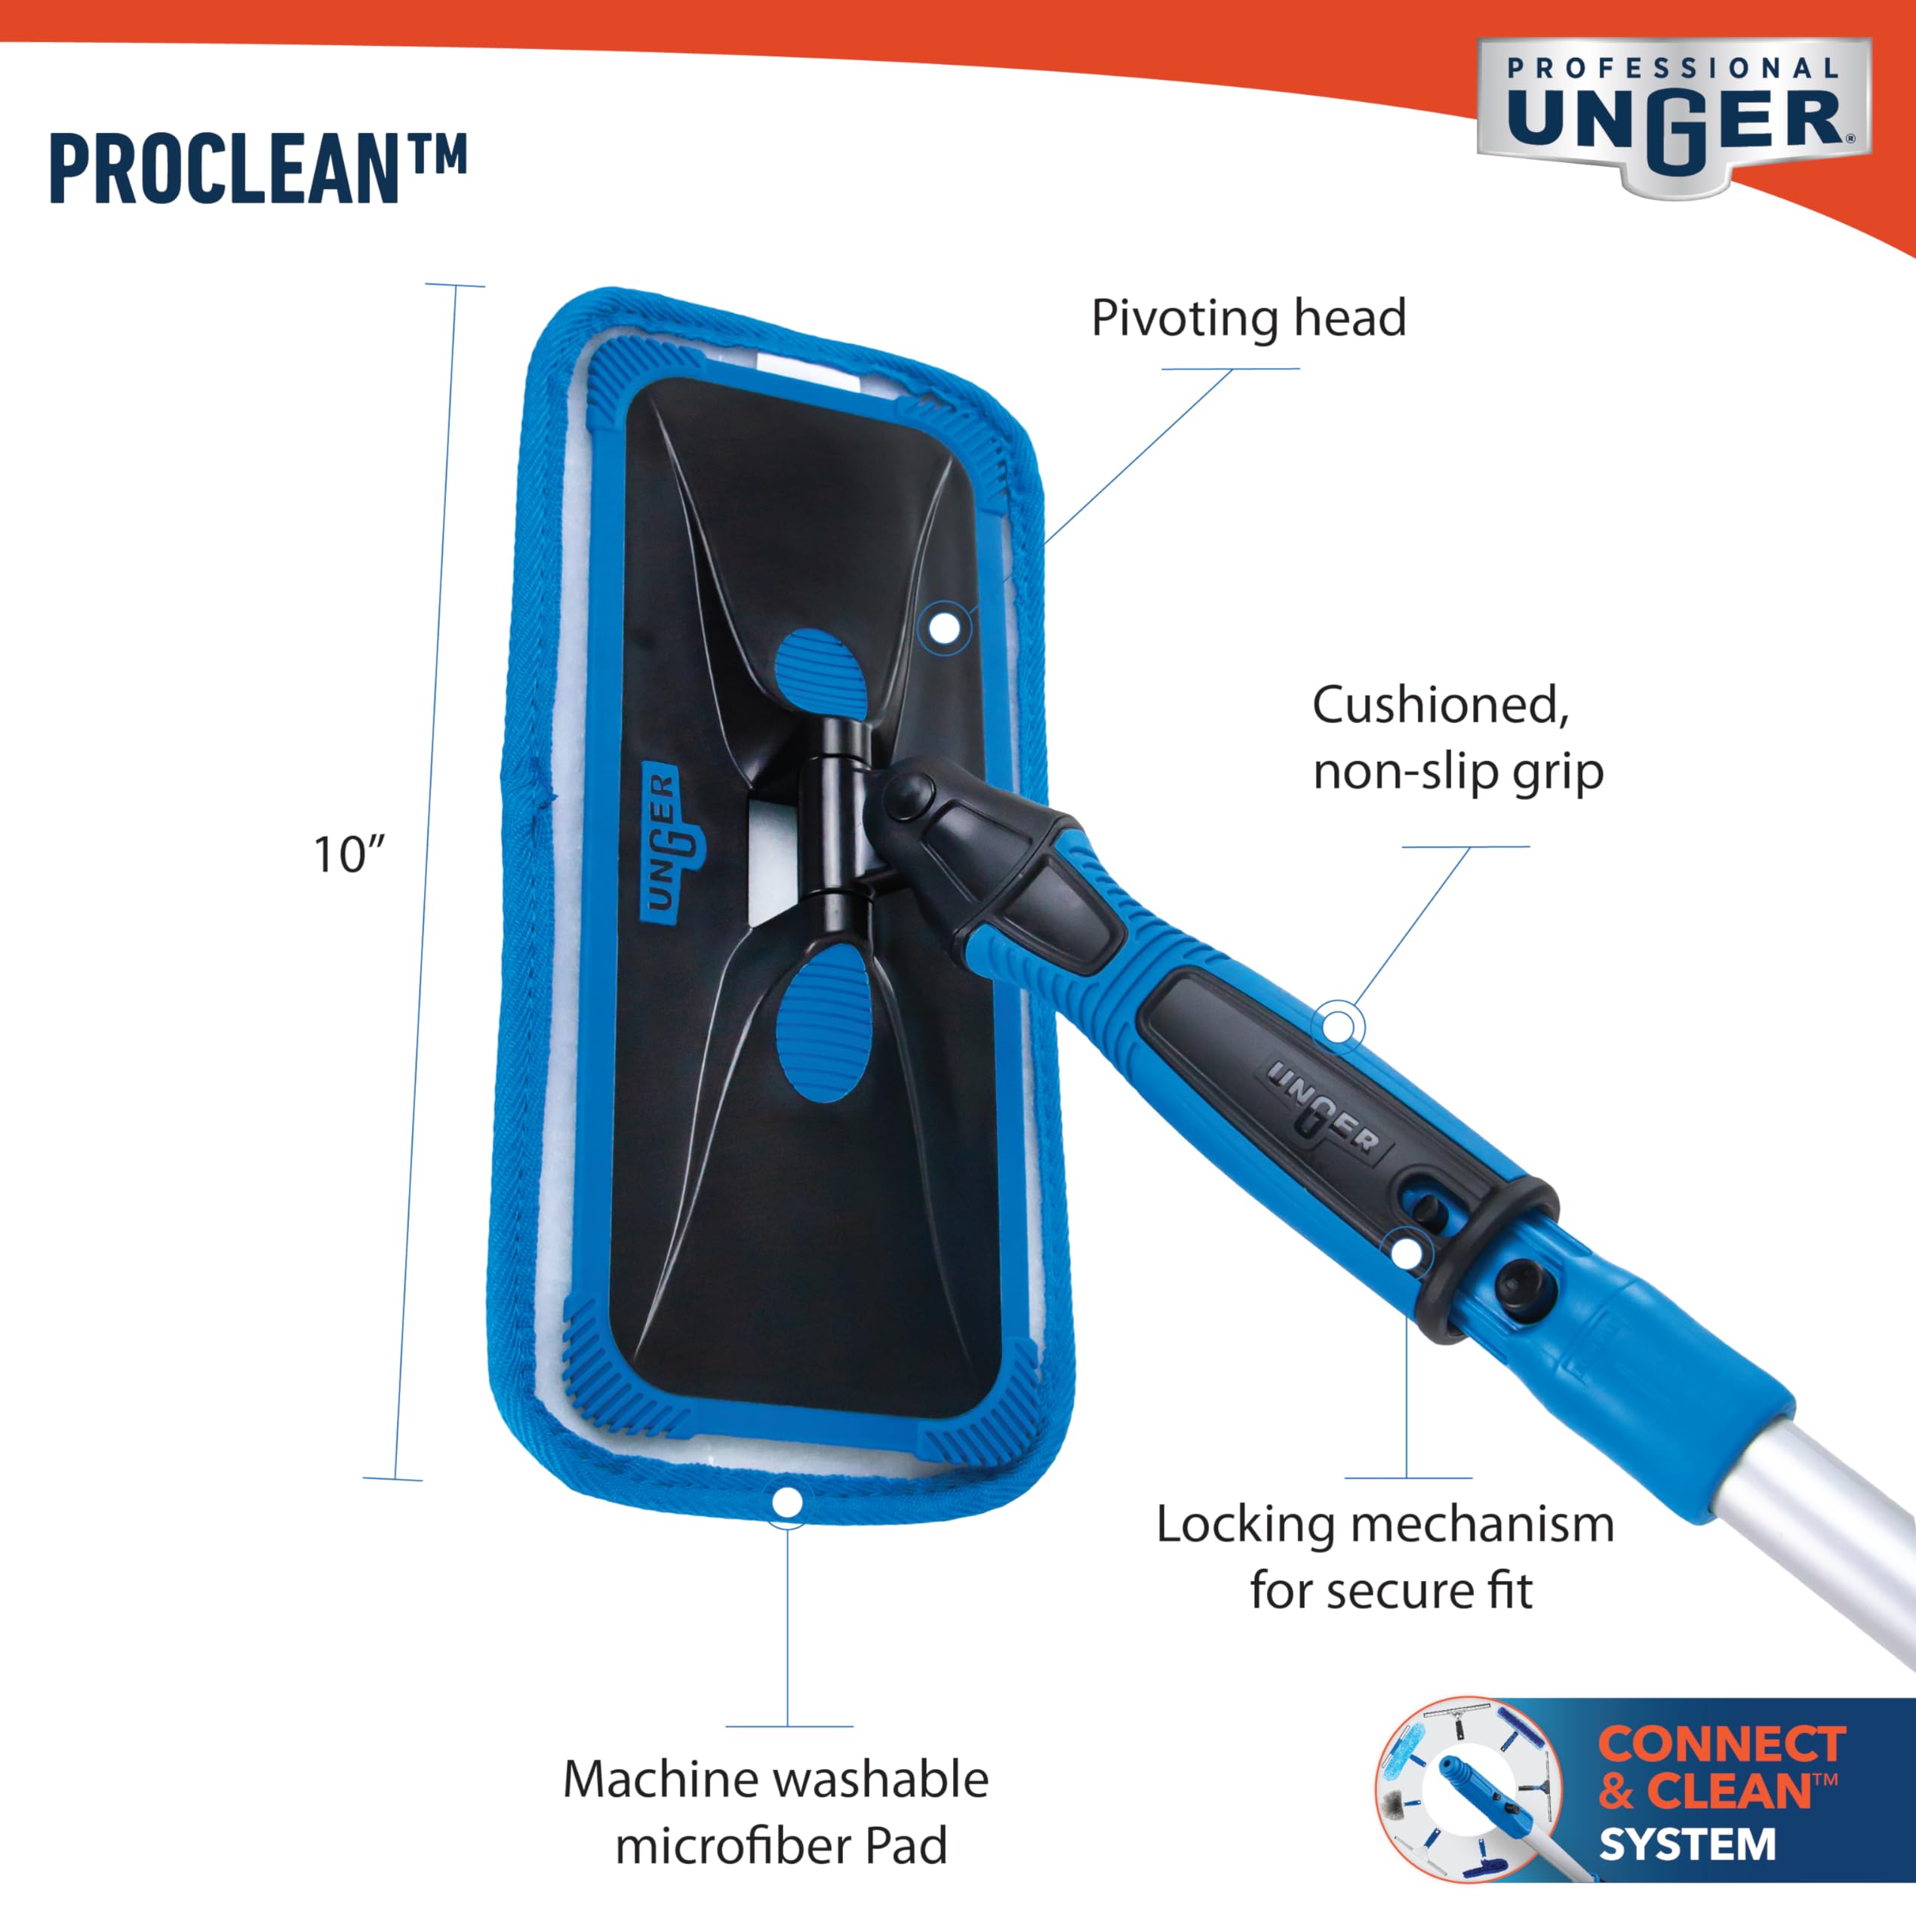 Unger ProClean Indoor Window Cleaner, Tool for Window, Glass, and Mirror Cleaning, Streak-Free Results, Reusable Microfiber Pads for Sustainability